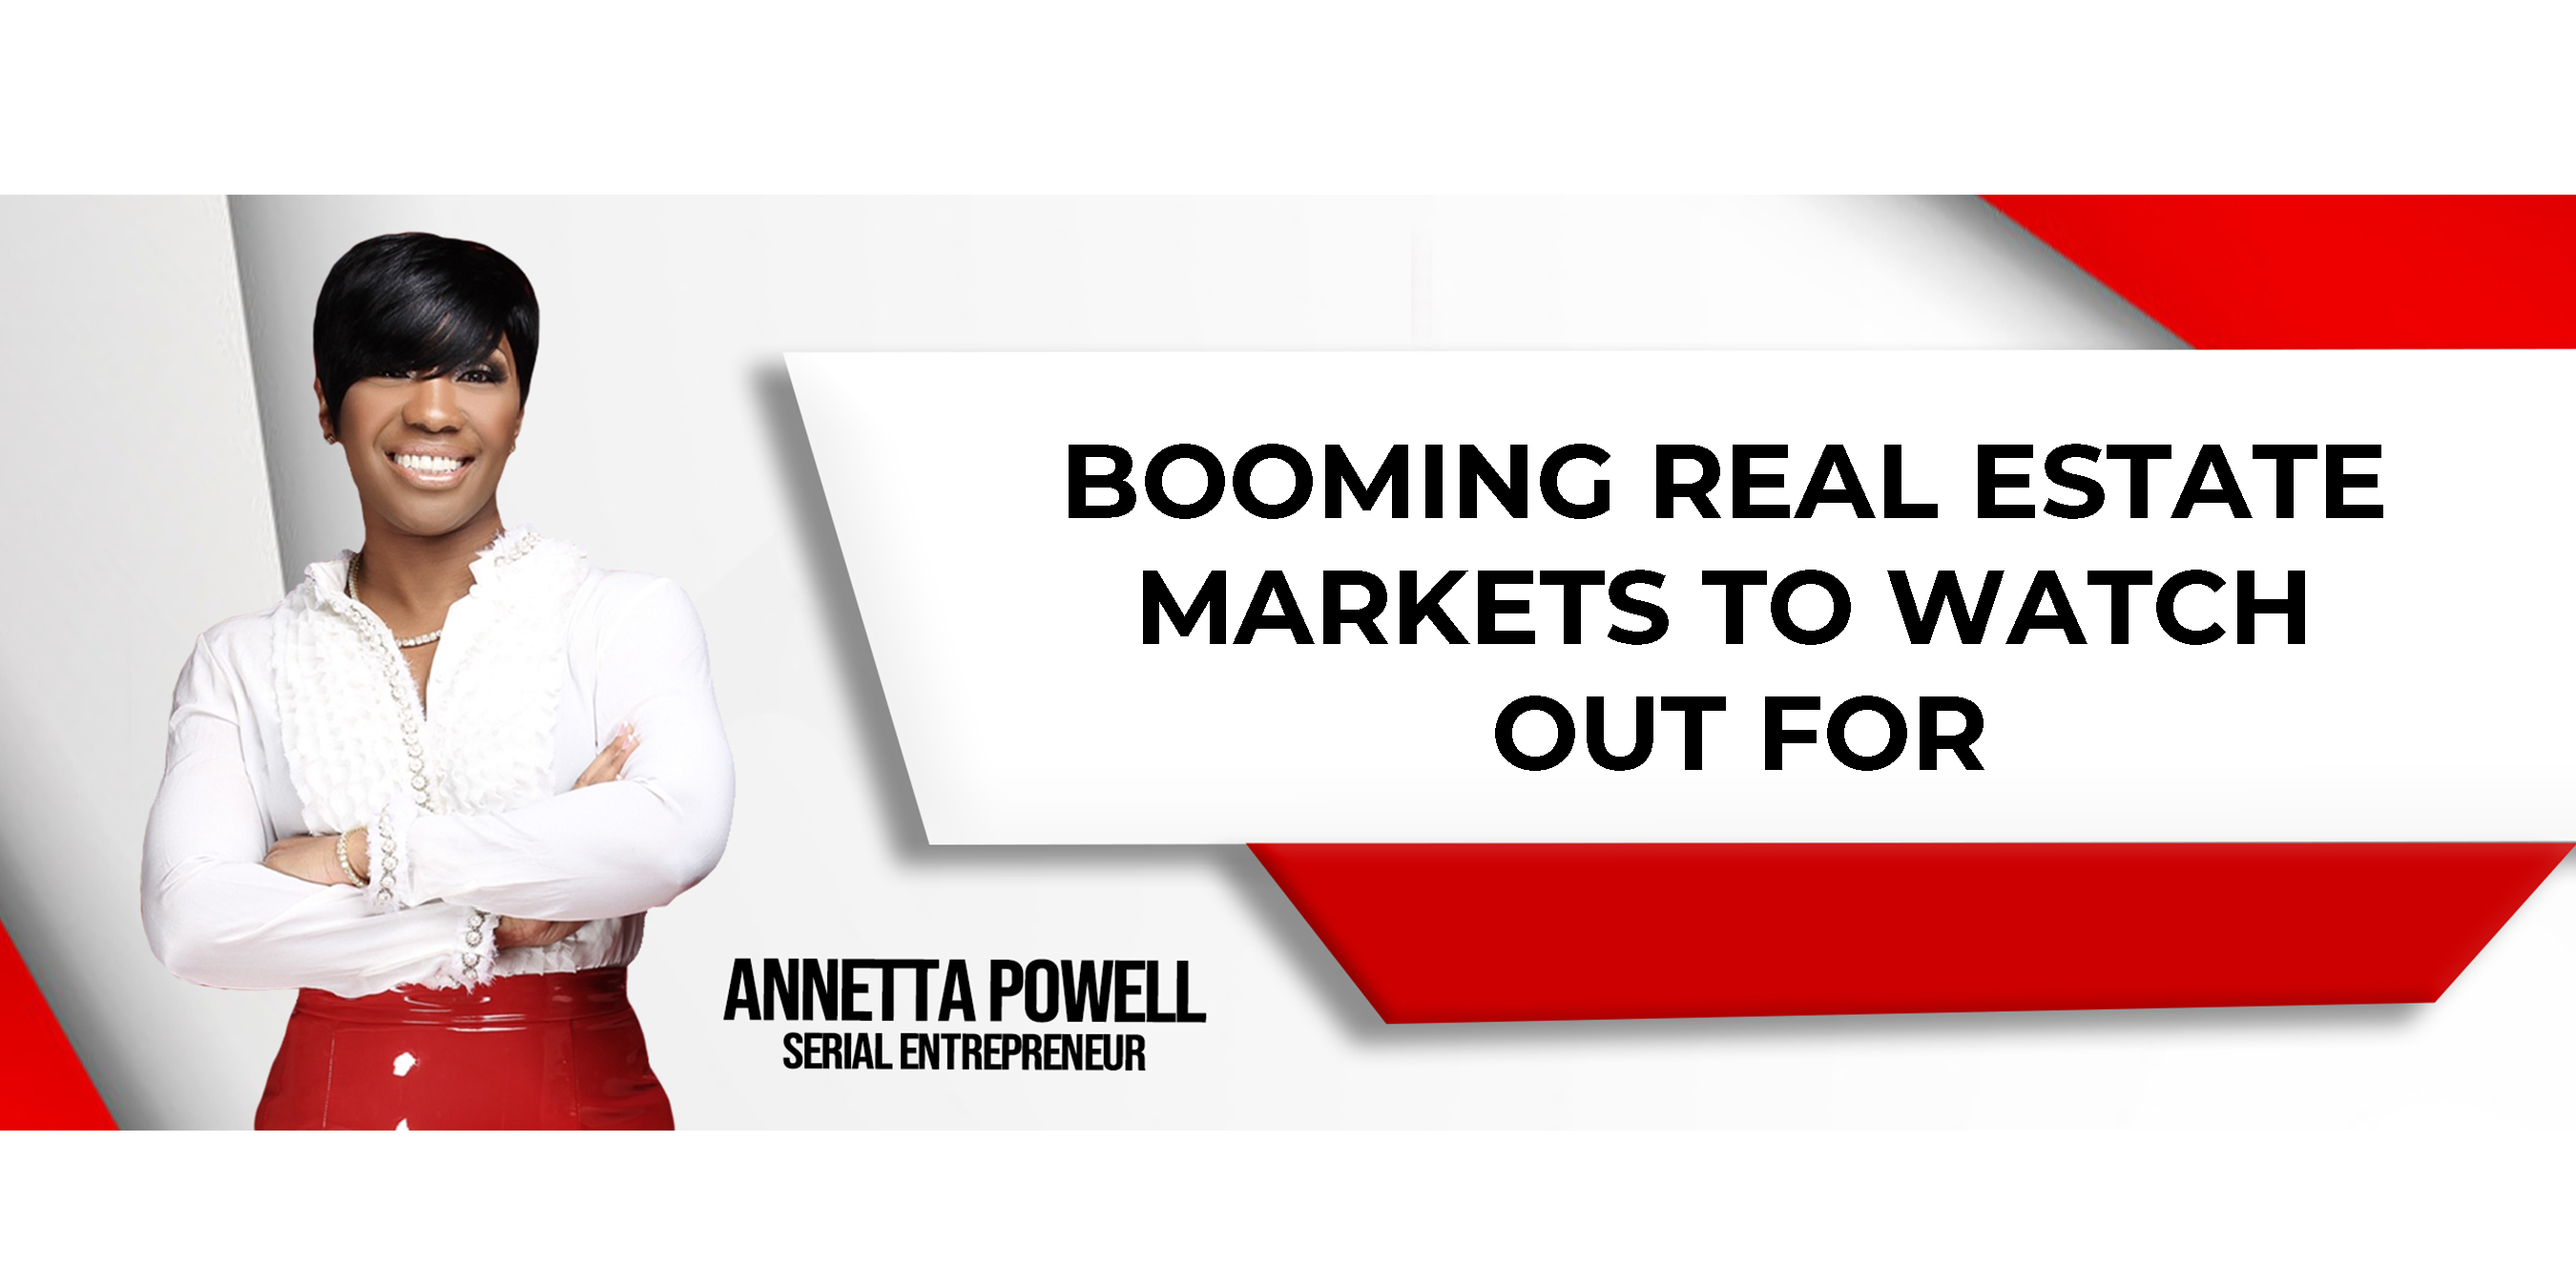 Watch Out For These Booming Real Estate Markets in 2022